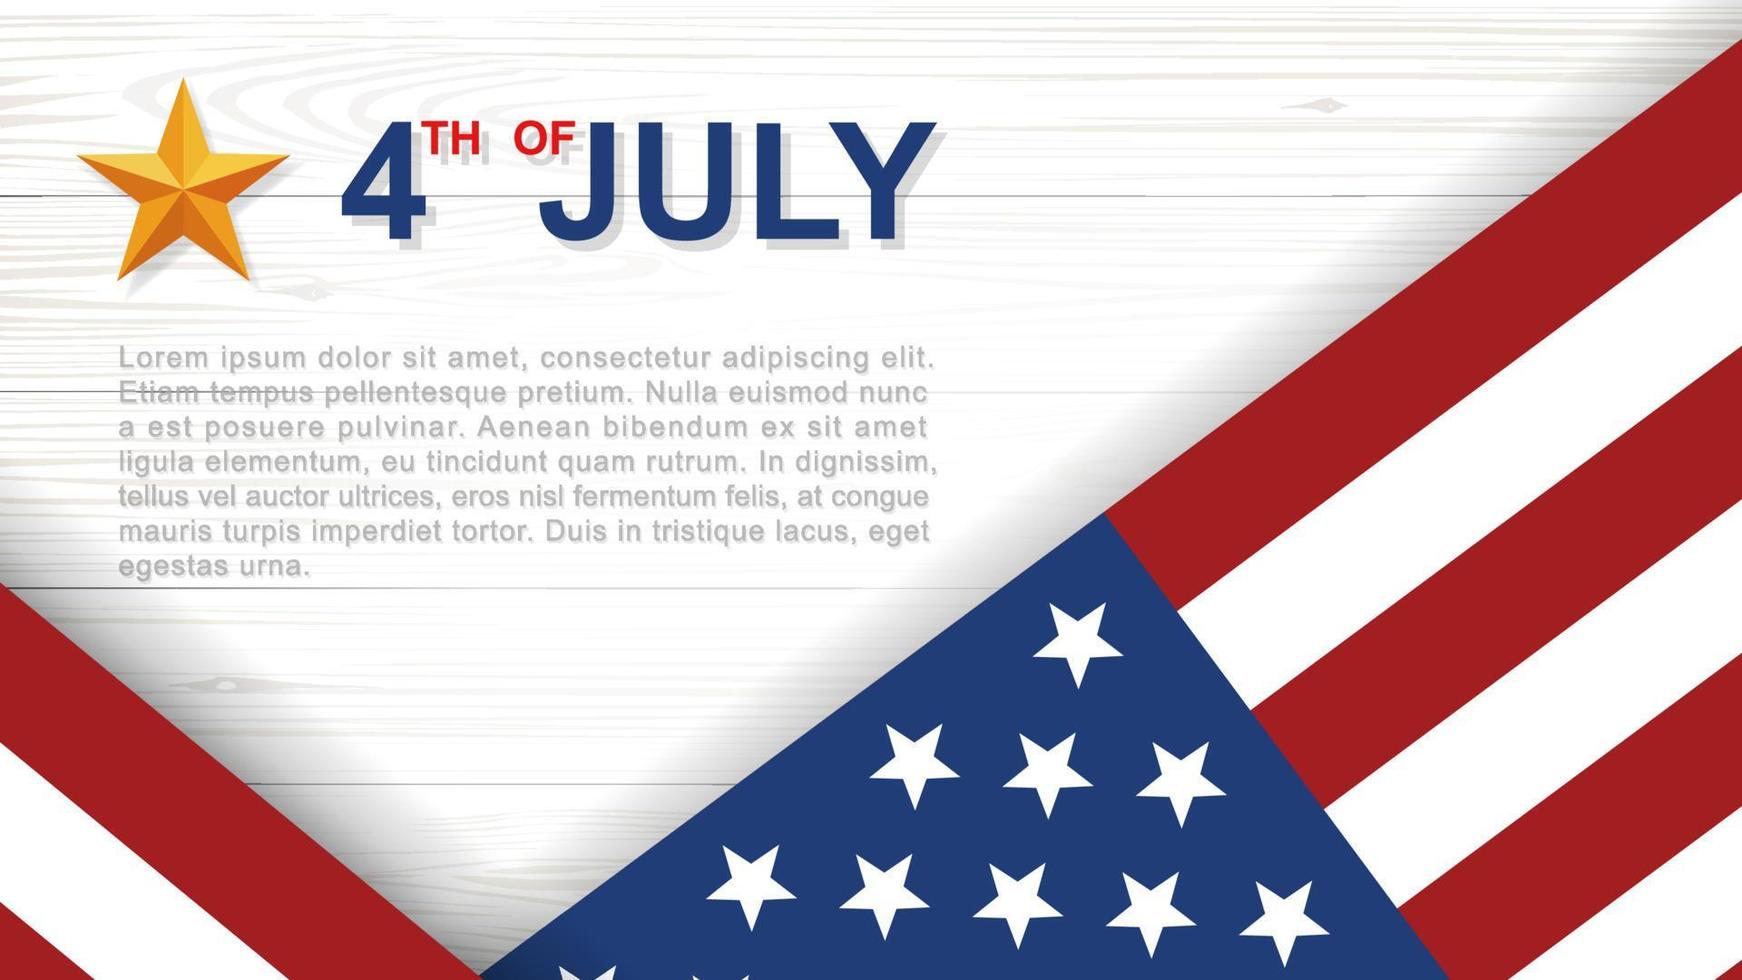 4th of July - Background for United States of America Independence Day with white wood pattern and texture and American flag. Background with area for copy space and text. Vector illustration.